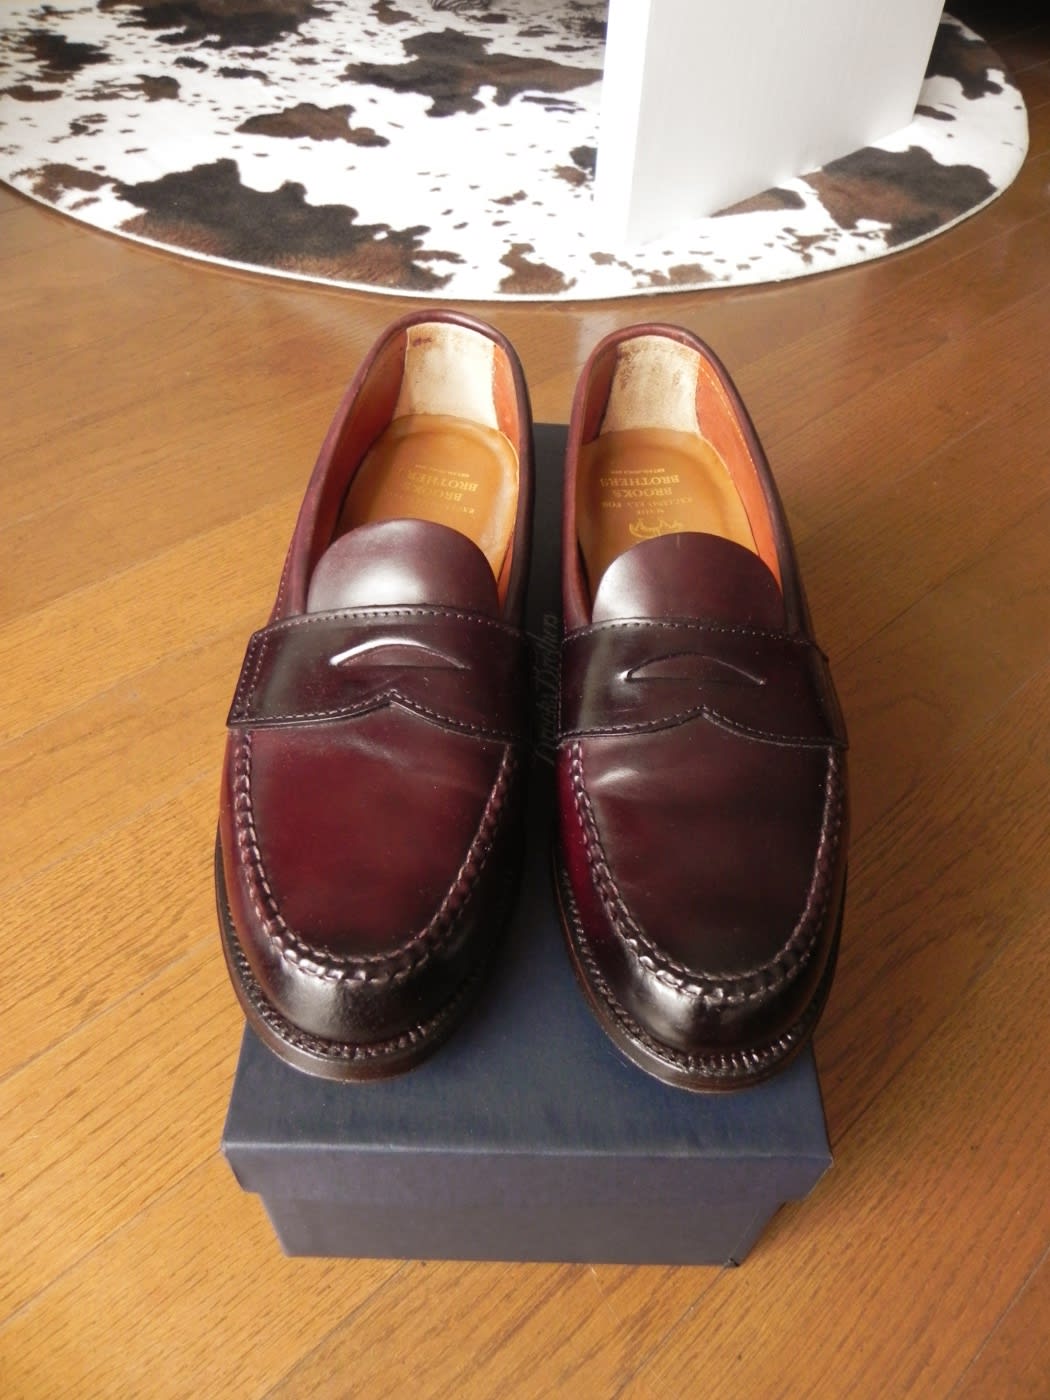 BrooksBrothers Alden #763 Penny Loafers - お買いモノ考